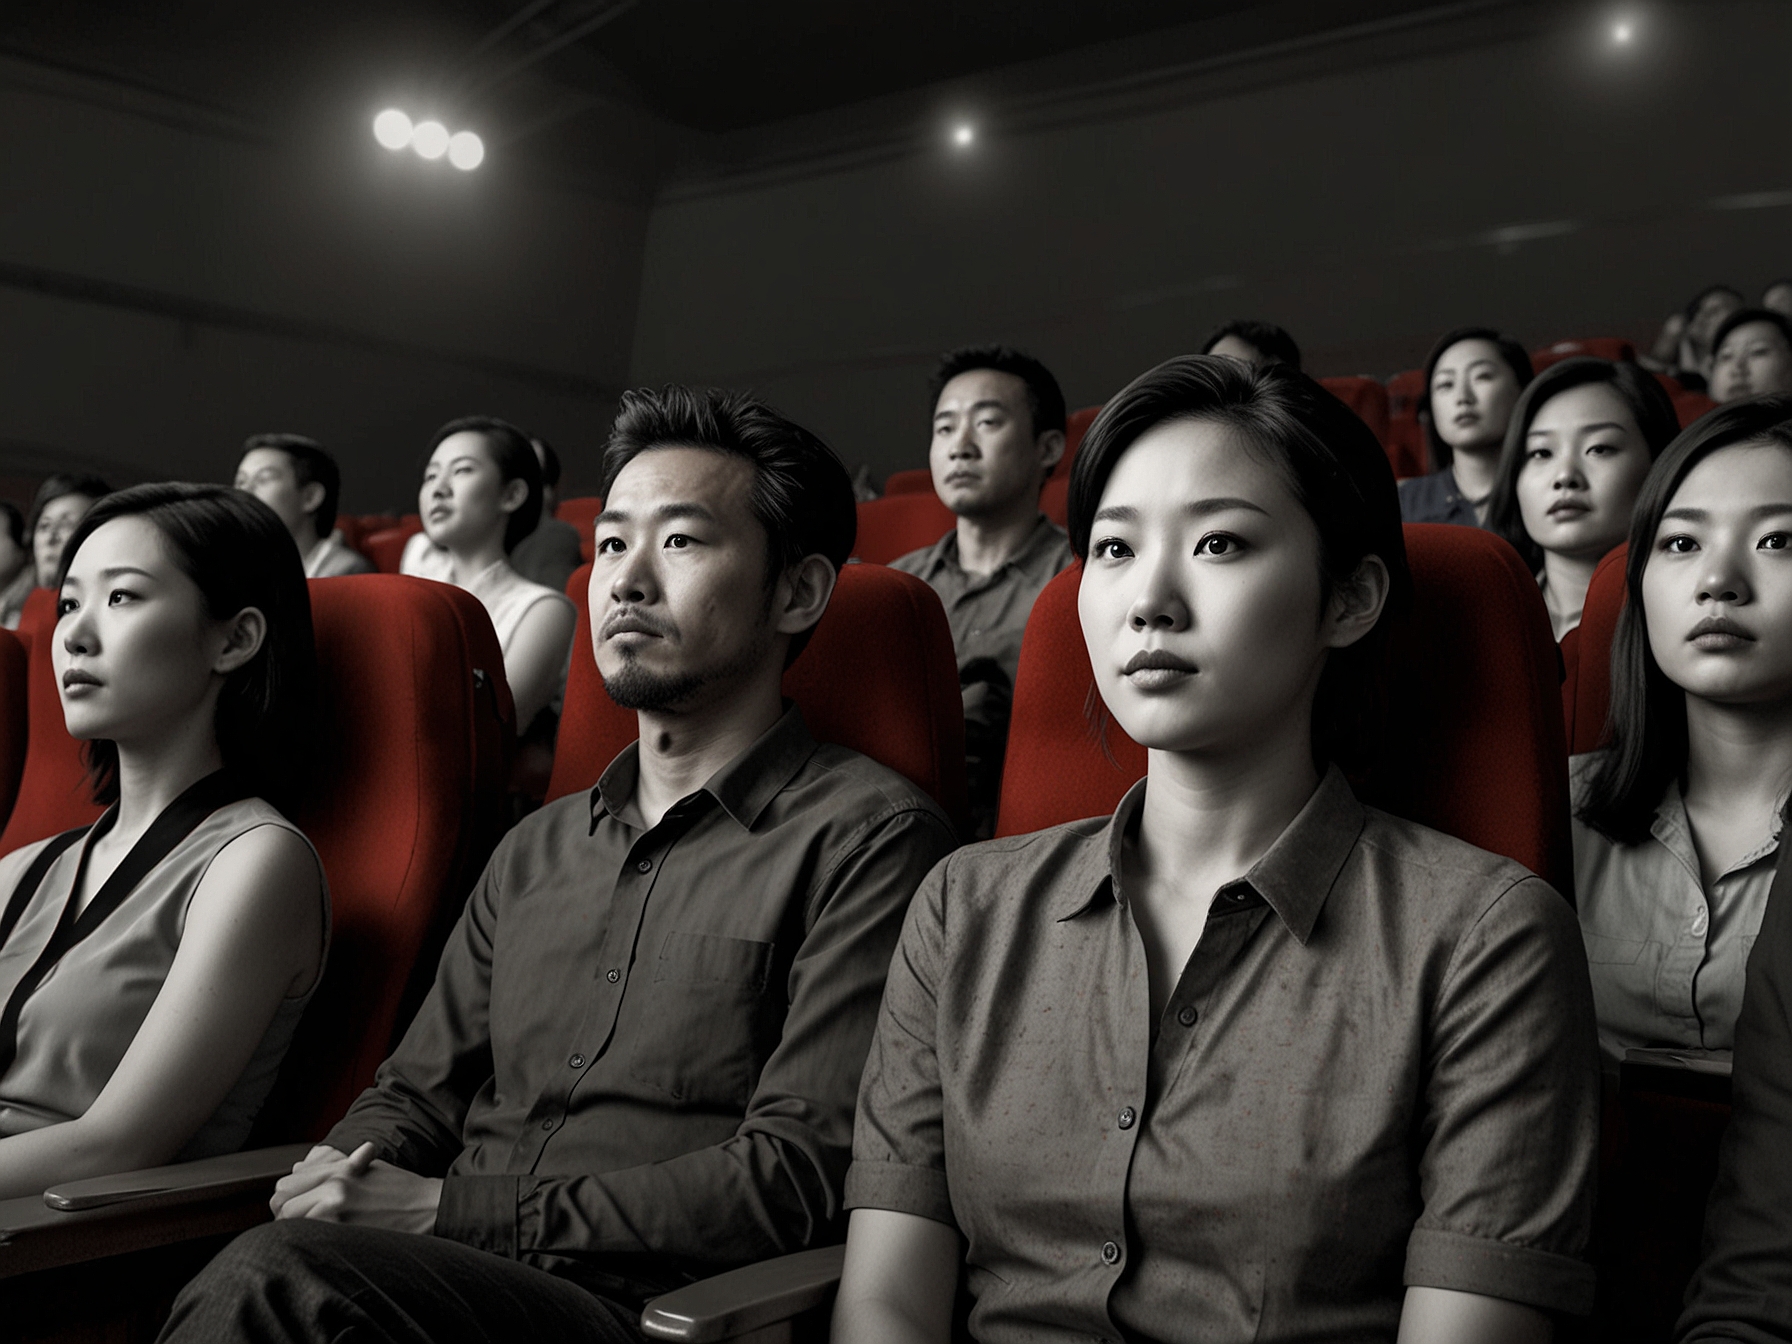 Chinese moviegoers watching a film in a modern theater, symbolizing the excitement and anticipation for 'Deadpool & Wolverine' despite the censorship cuts. The audience's varied reactions highlight the film's broad appeal.